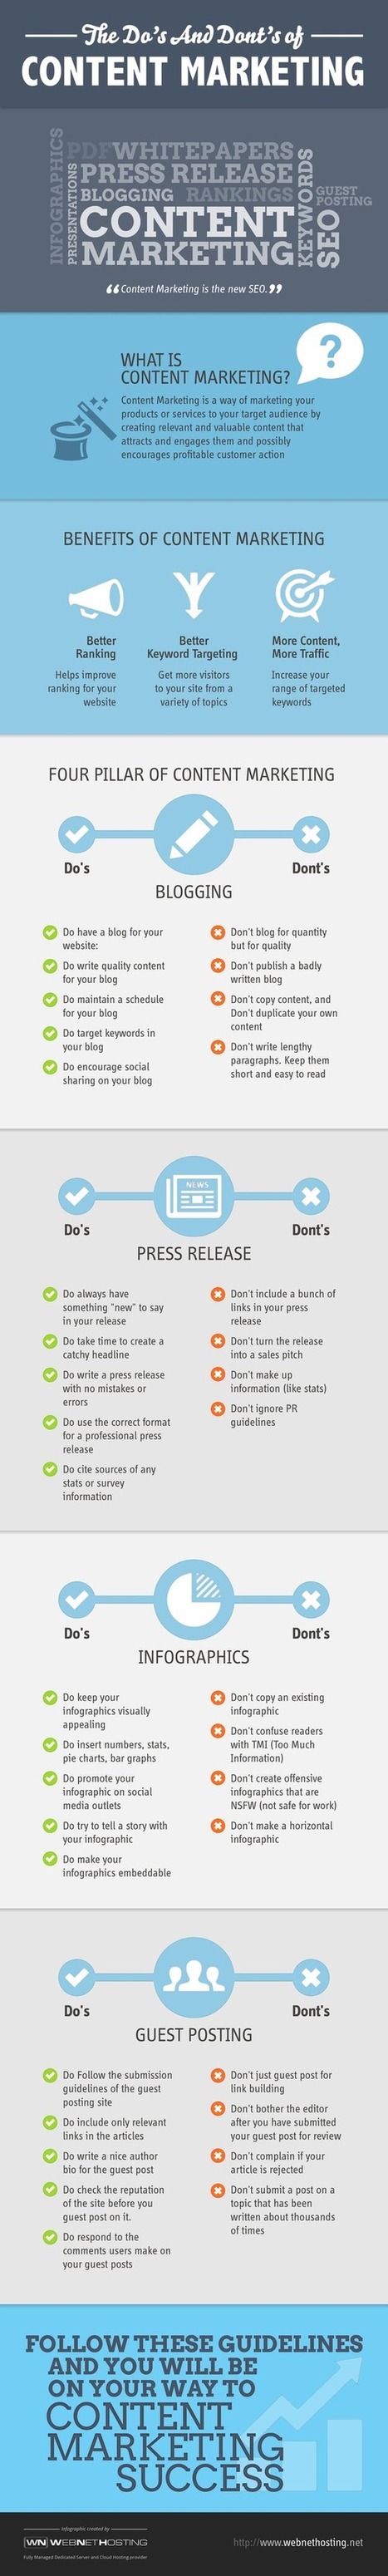 The Do's and Dont's of Content Marketing - Infographic | Lean content marketing | Scoop.it